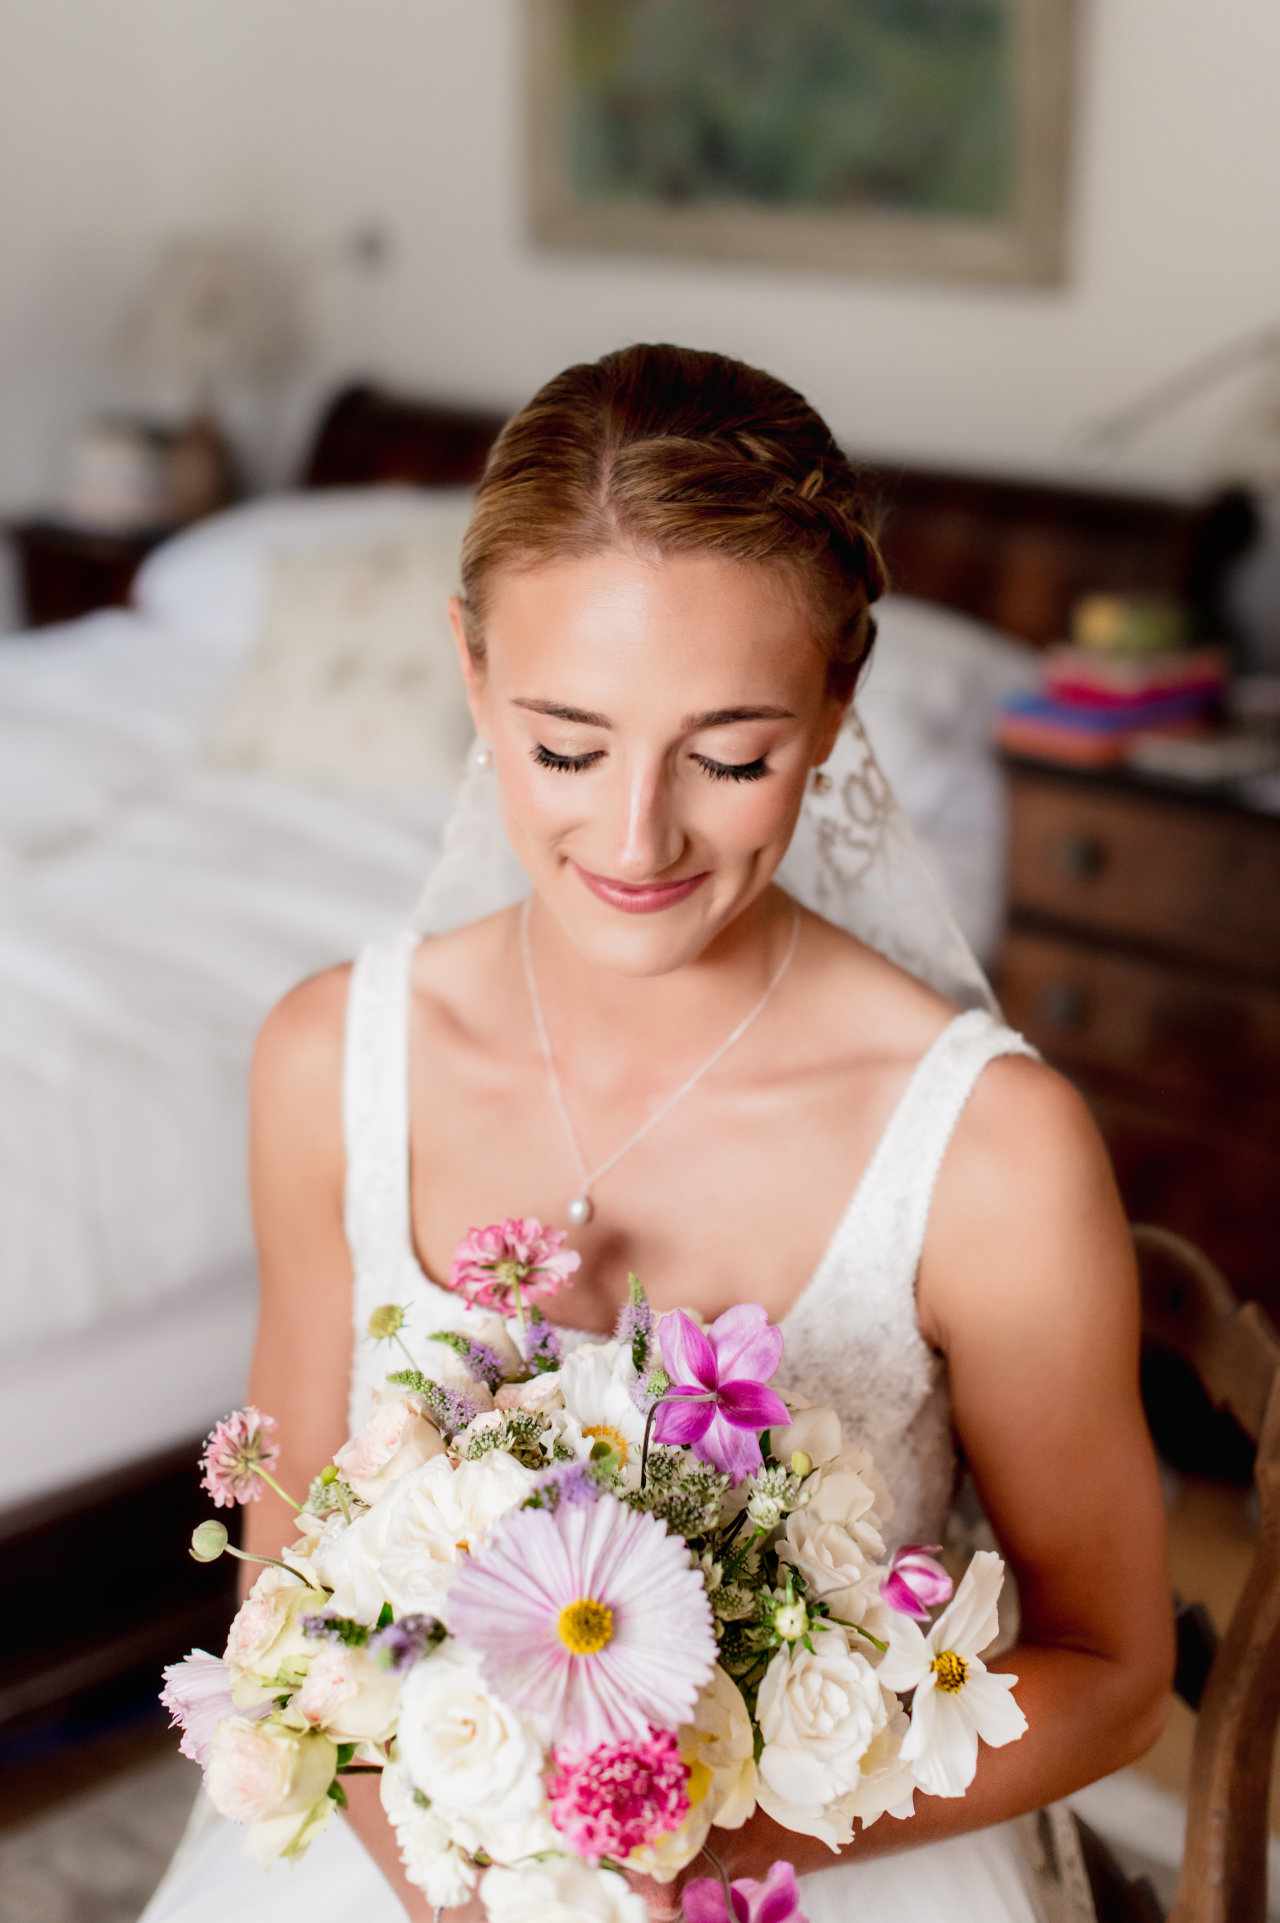 Blushing bride with stunning bouquet